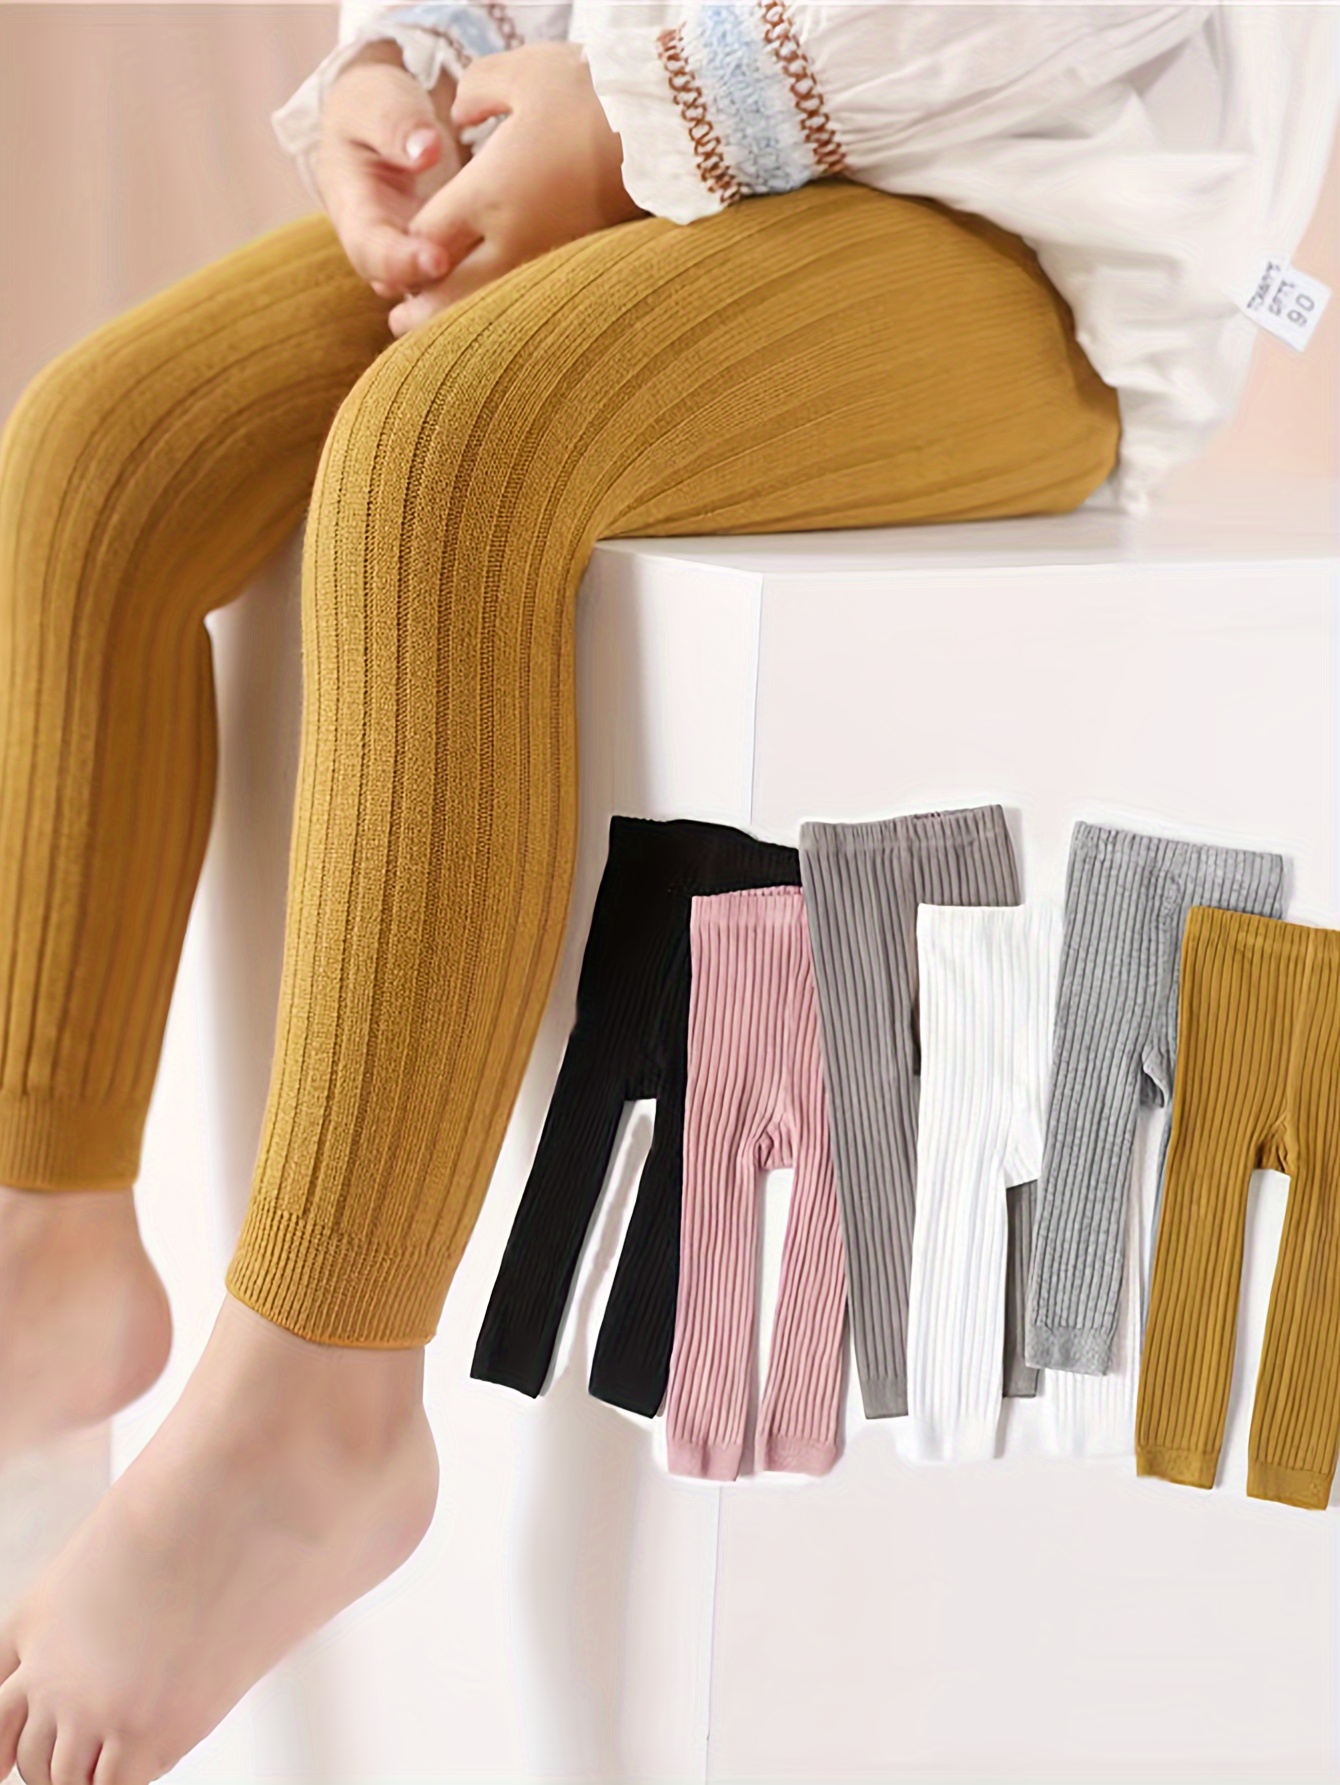 Official Thick Ribbed Leggings